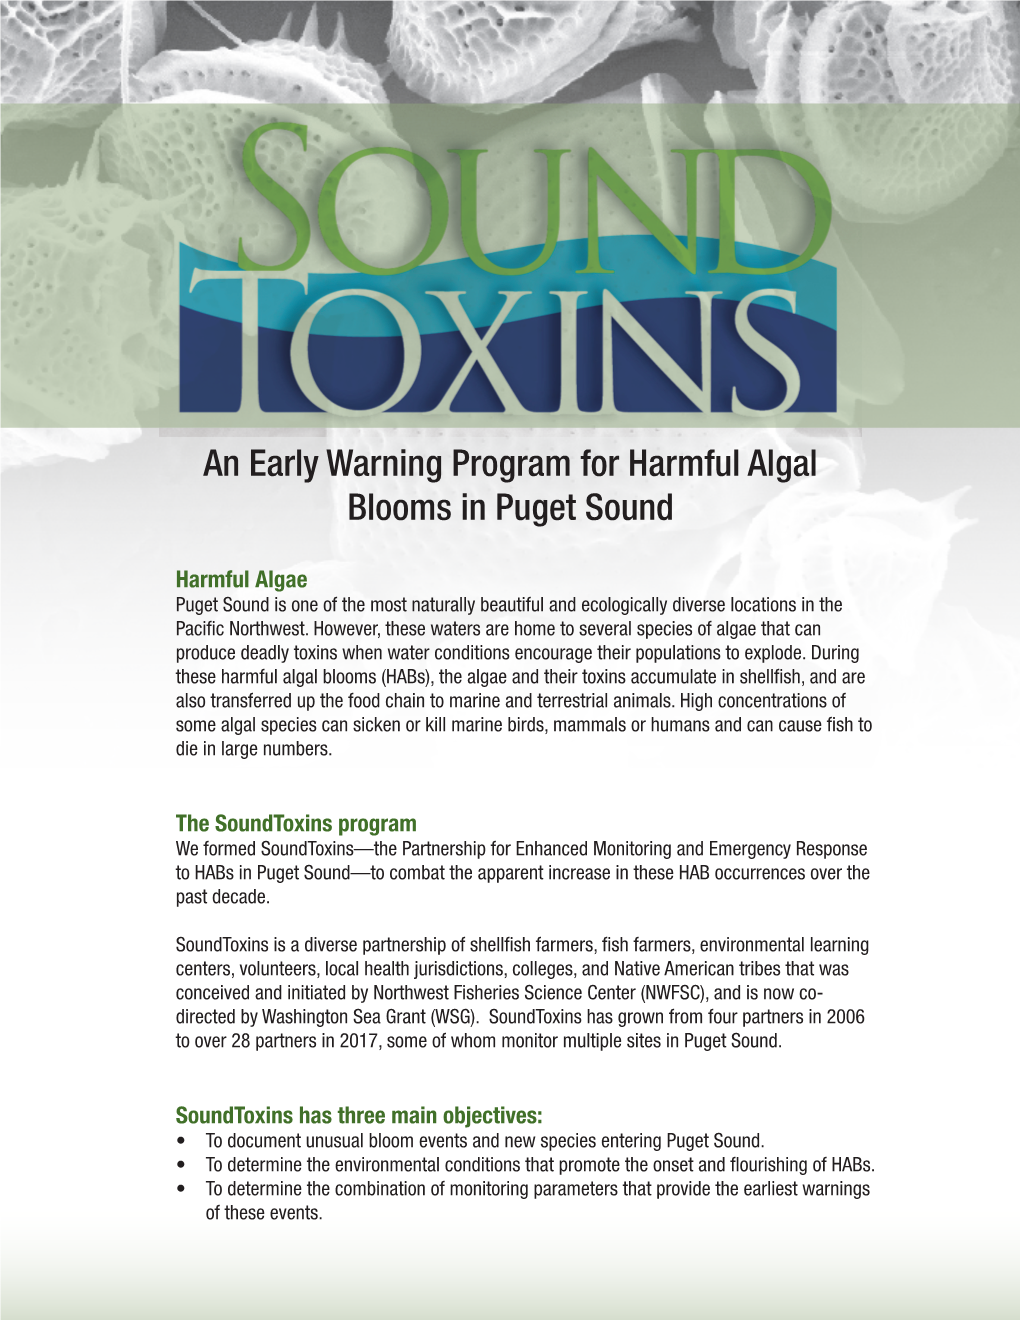 An Early Warning Program for Harmful Algal Blooms in Puget Sound